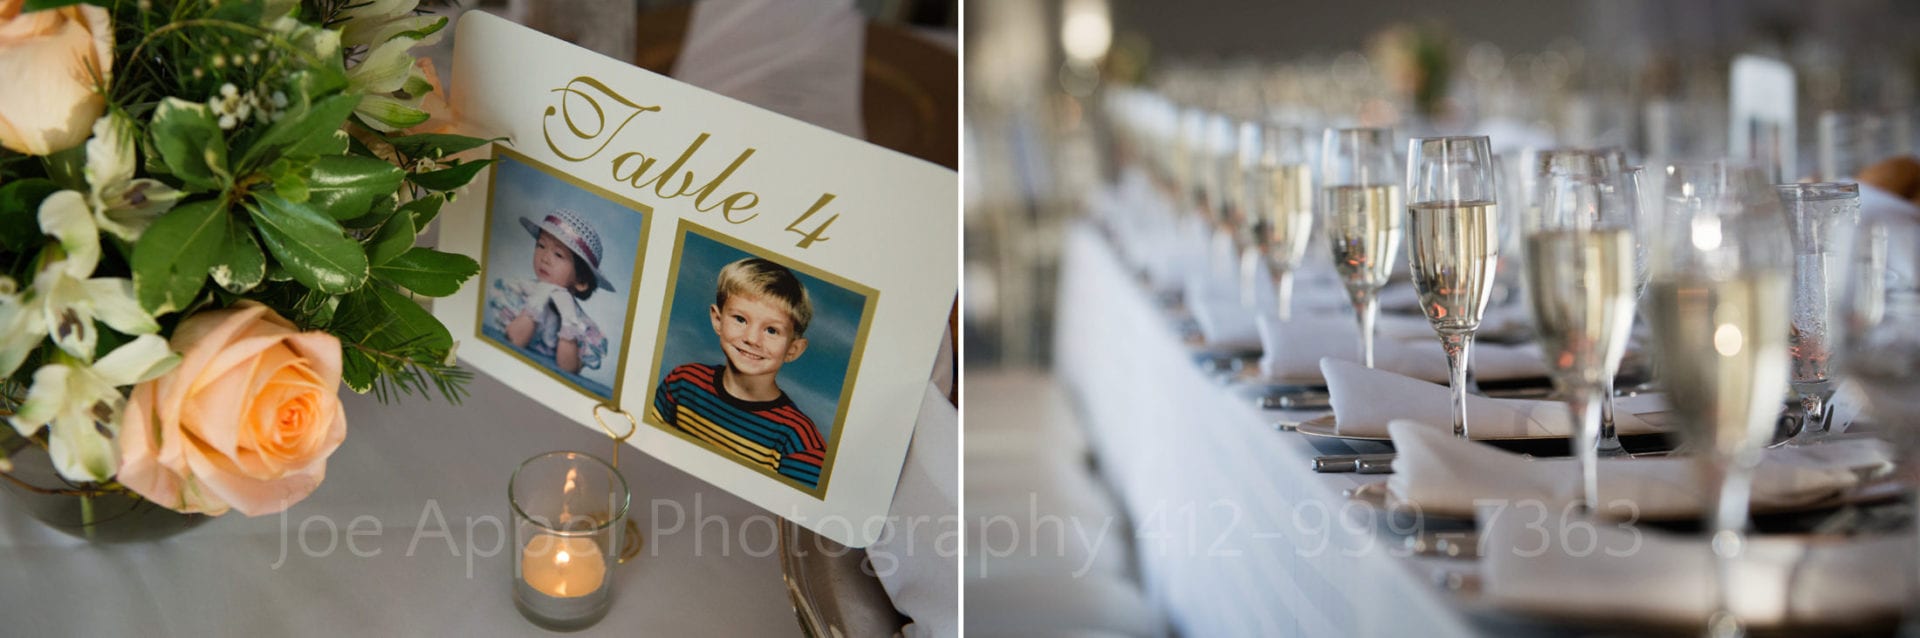 table cards with childhood pictures of the bride and groom next to glasses of champagne